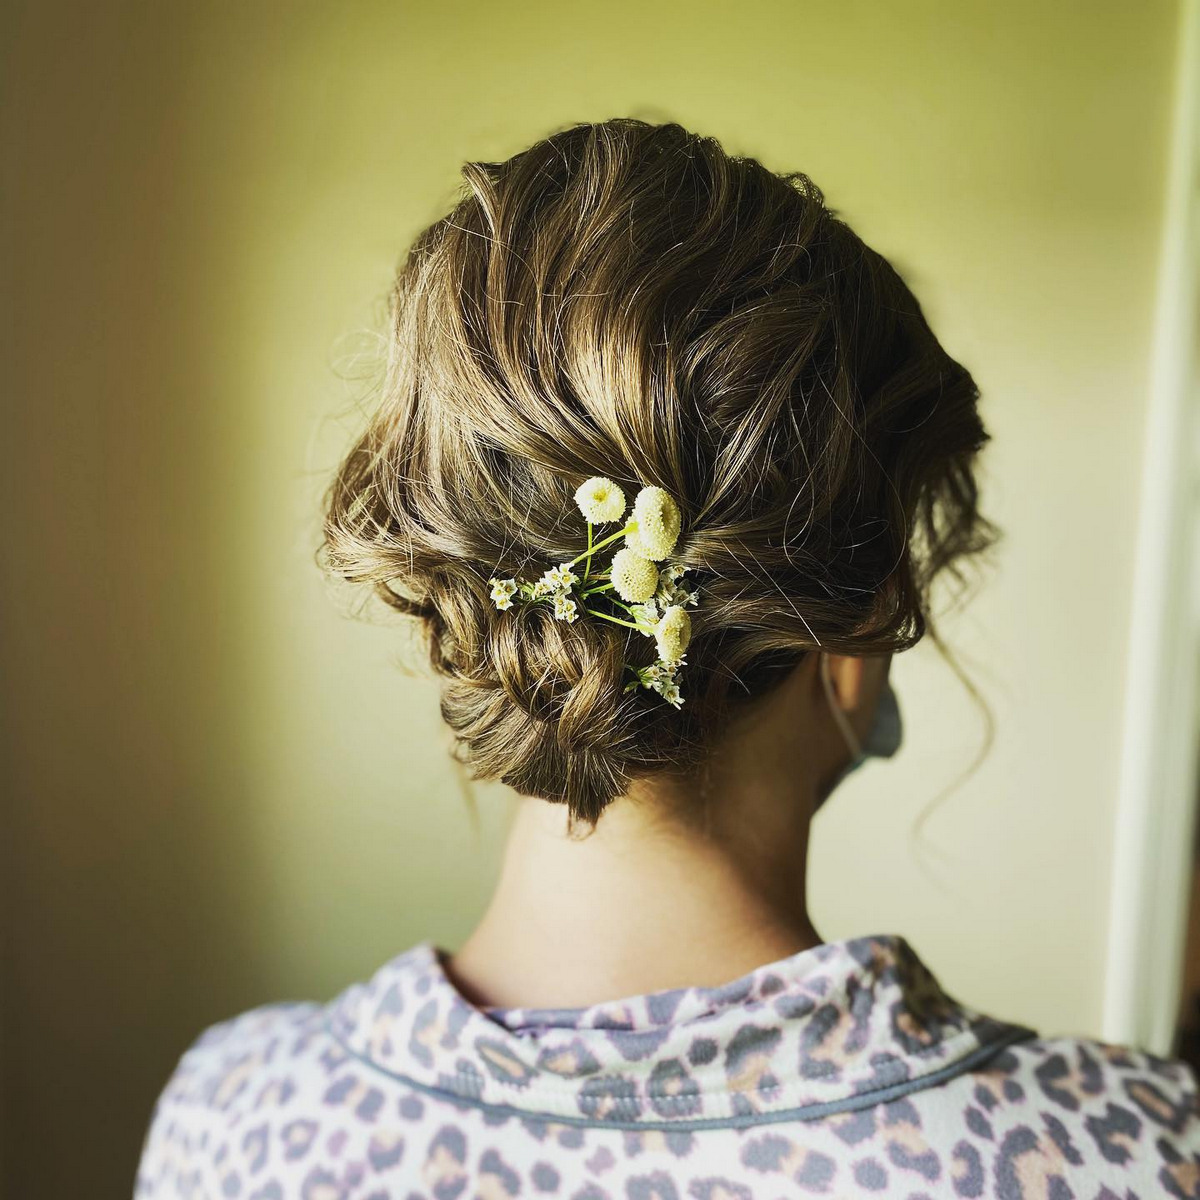 41 Wedding Hairstyles For Short Hair in 2023 - Hood MWR